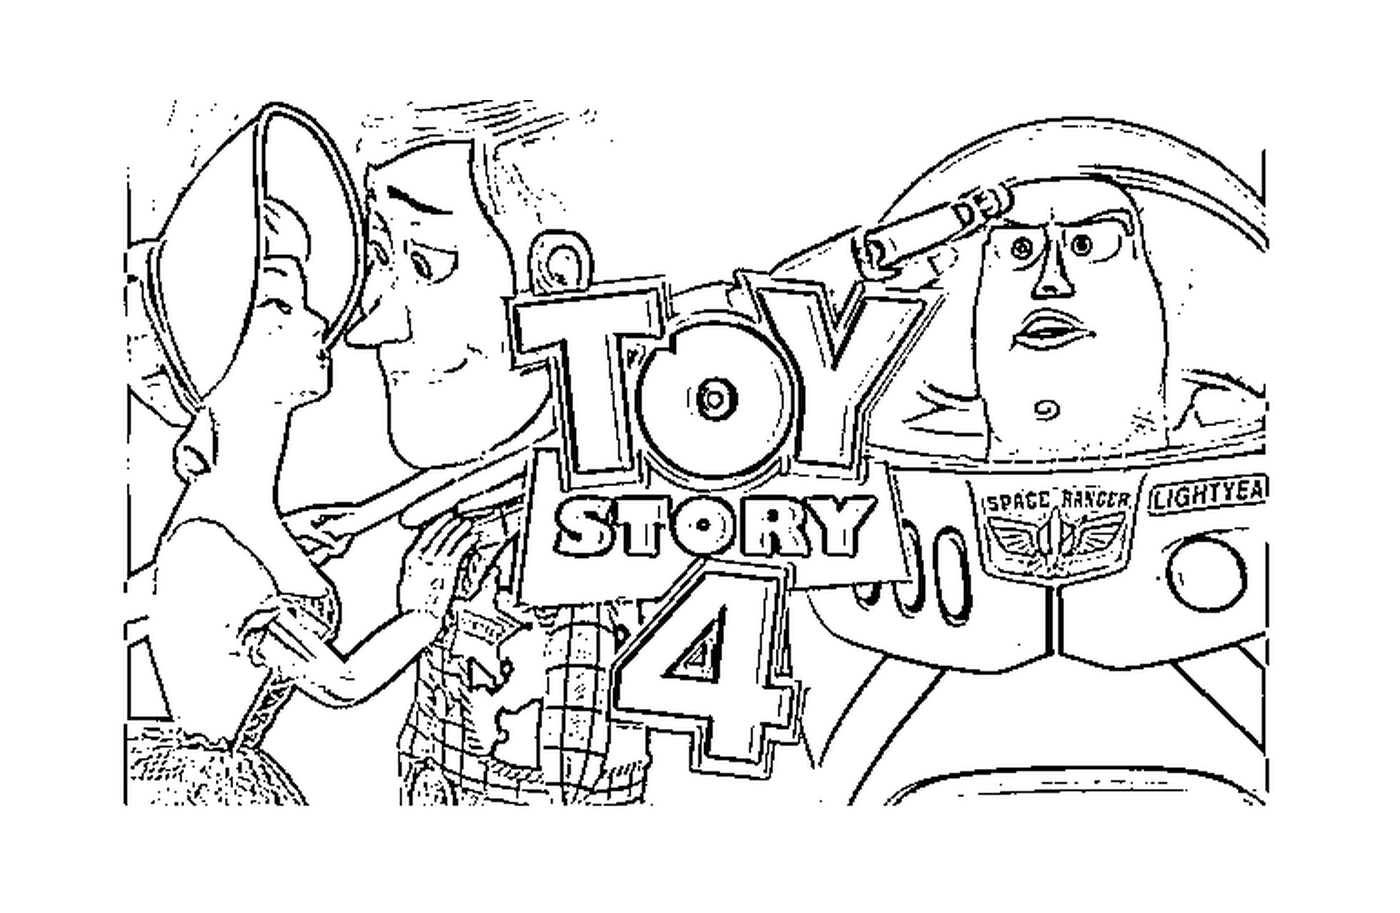   Toy Story 4, nouvelle aventure passionnante 